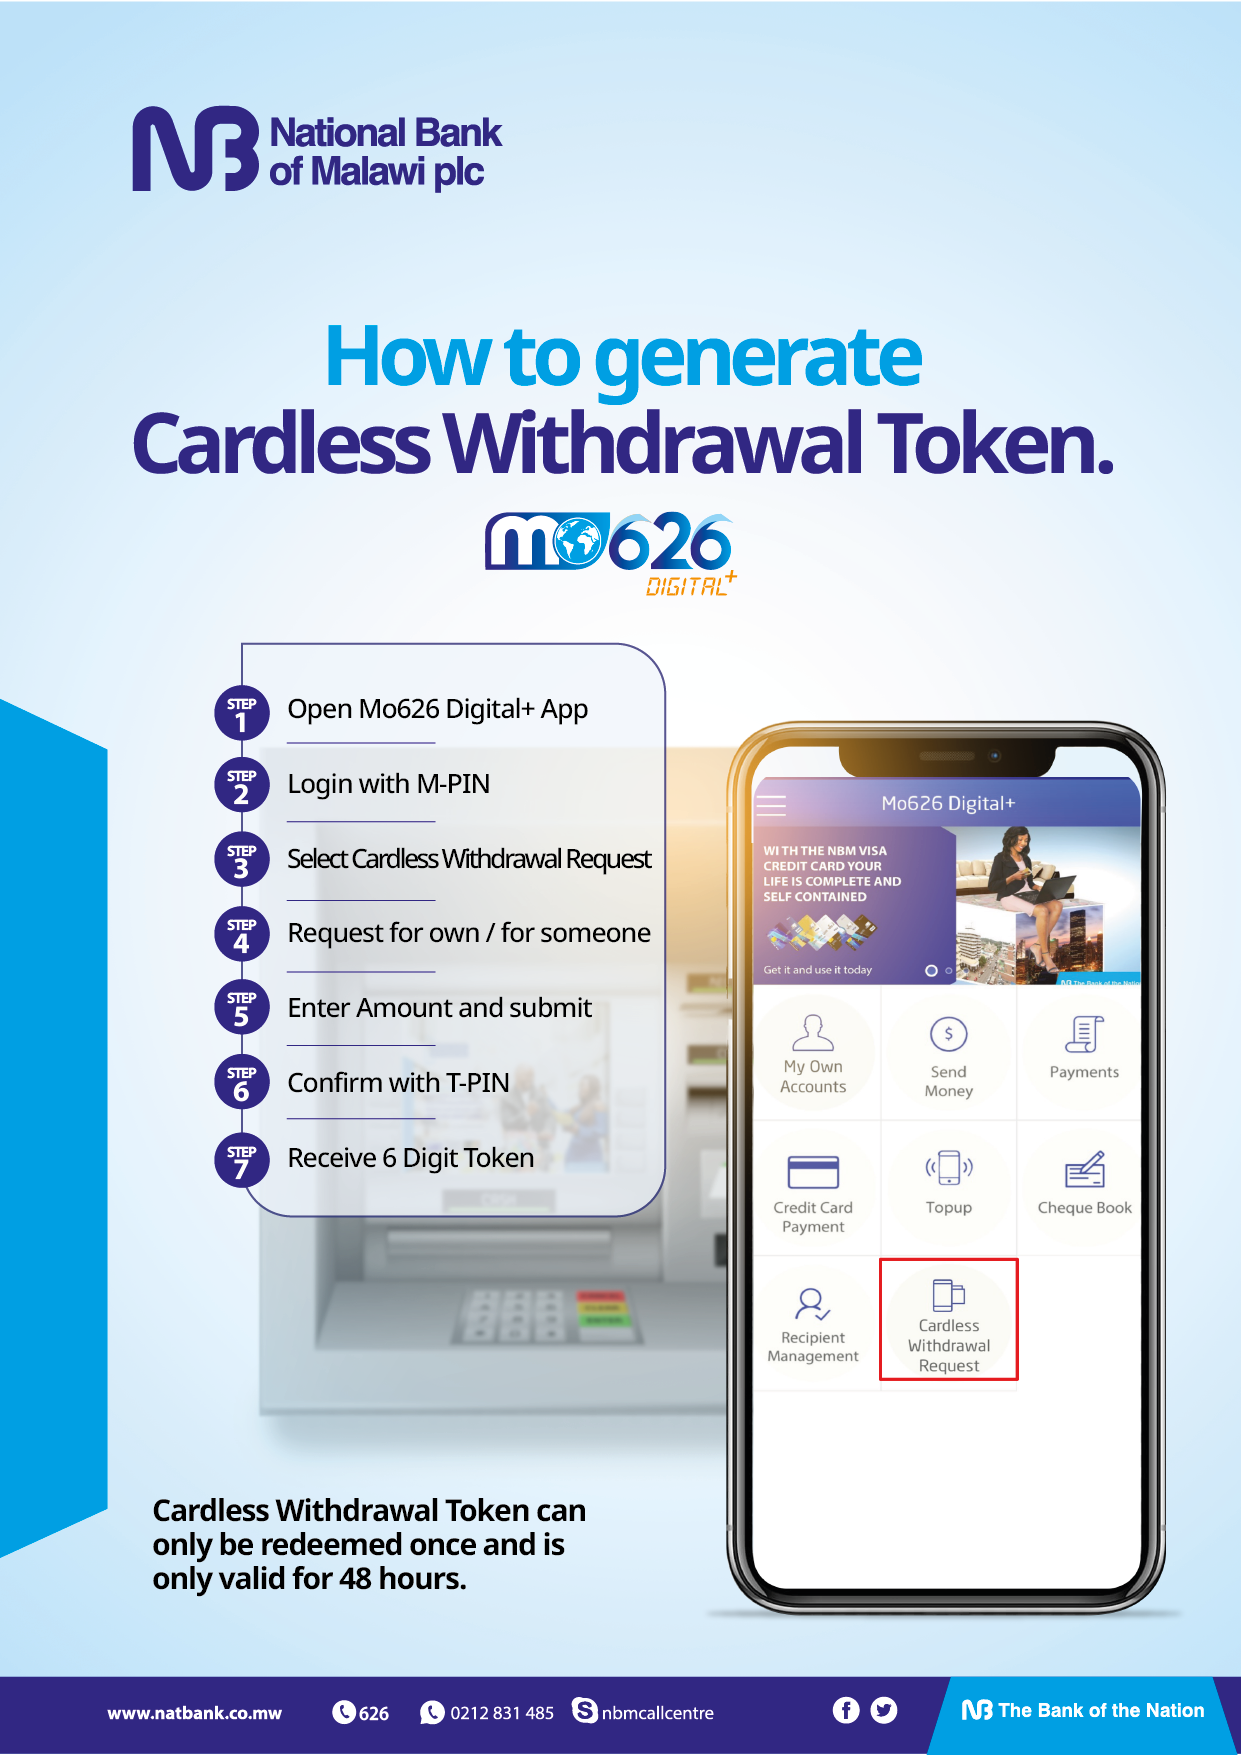 How to generate a Cardless Withdrawal Token